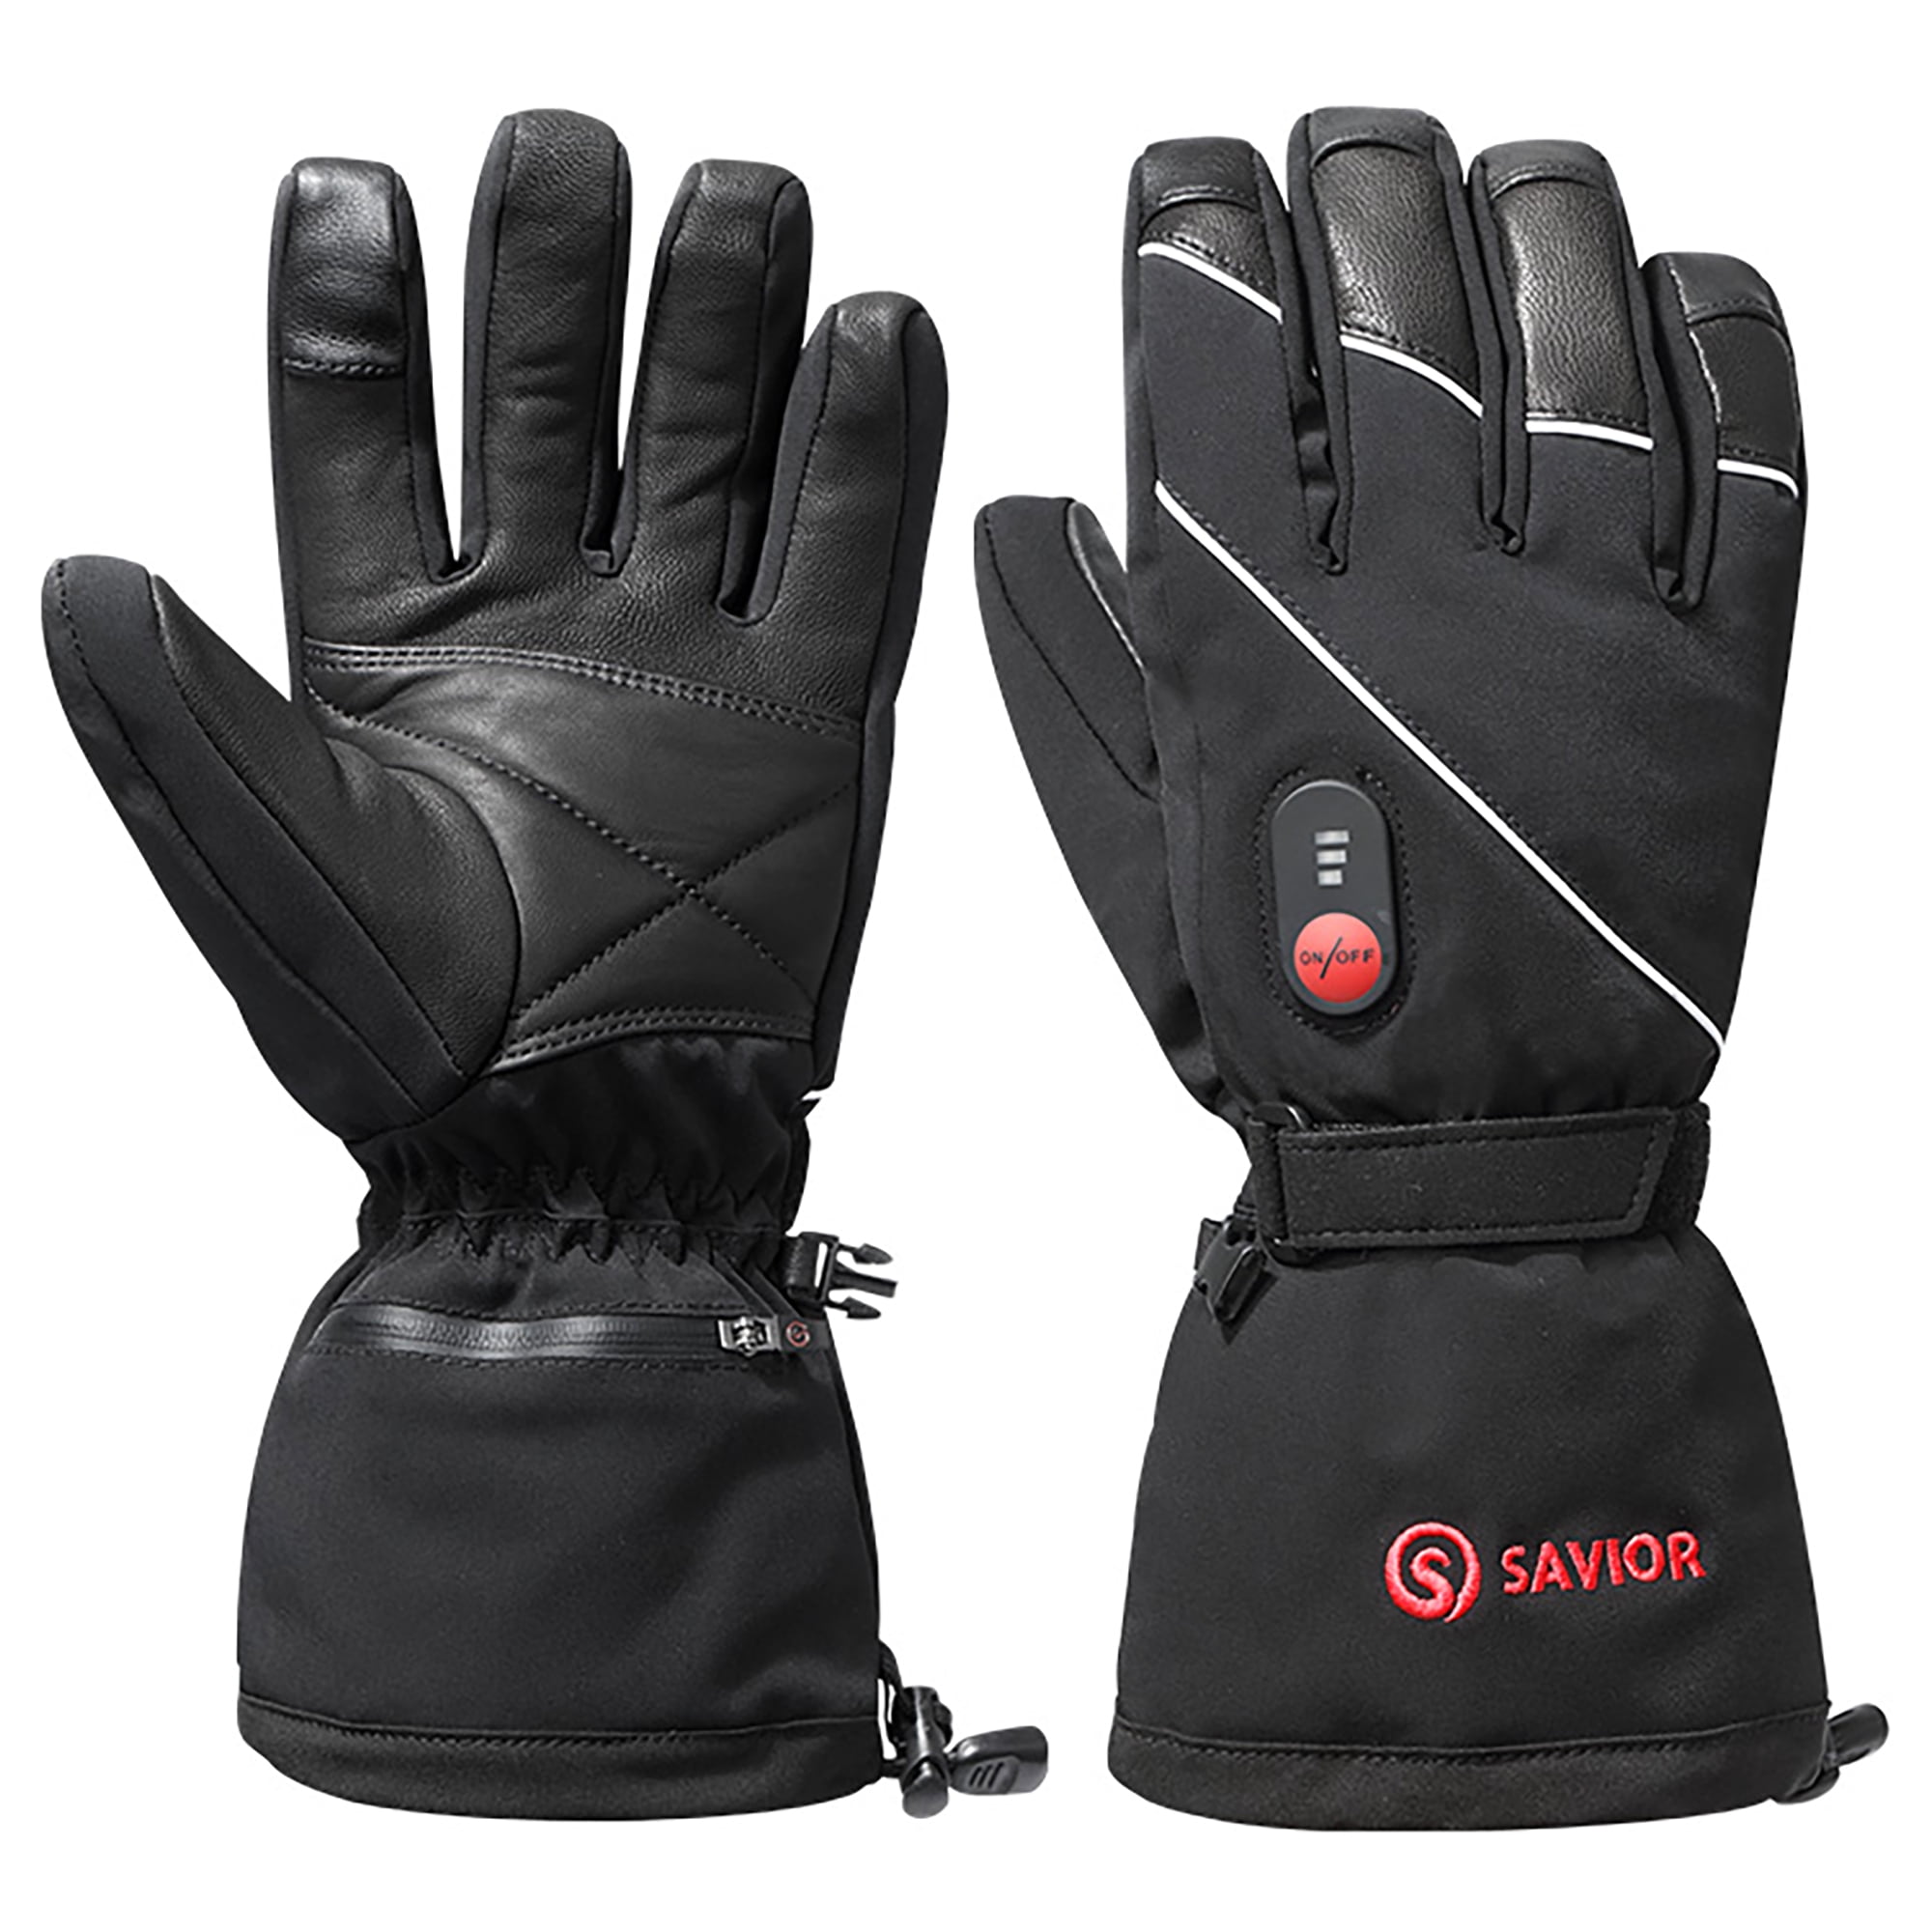 Savior Heated Gloves With Rechargable Battery Winter Work Warm Thin Gloves Como 